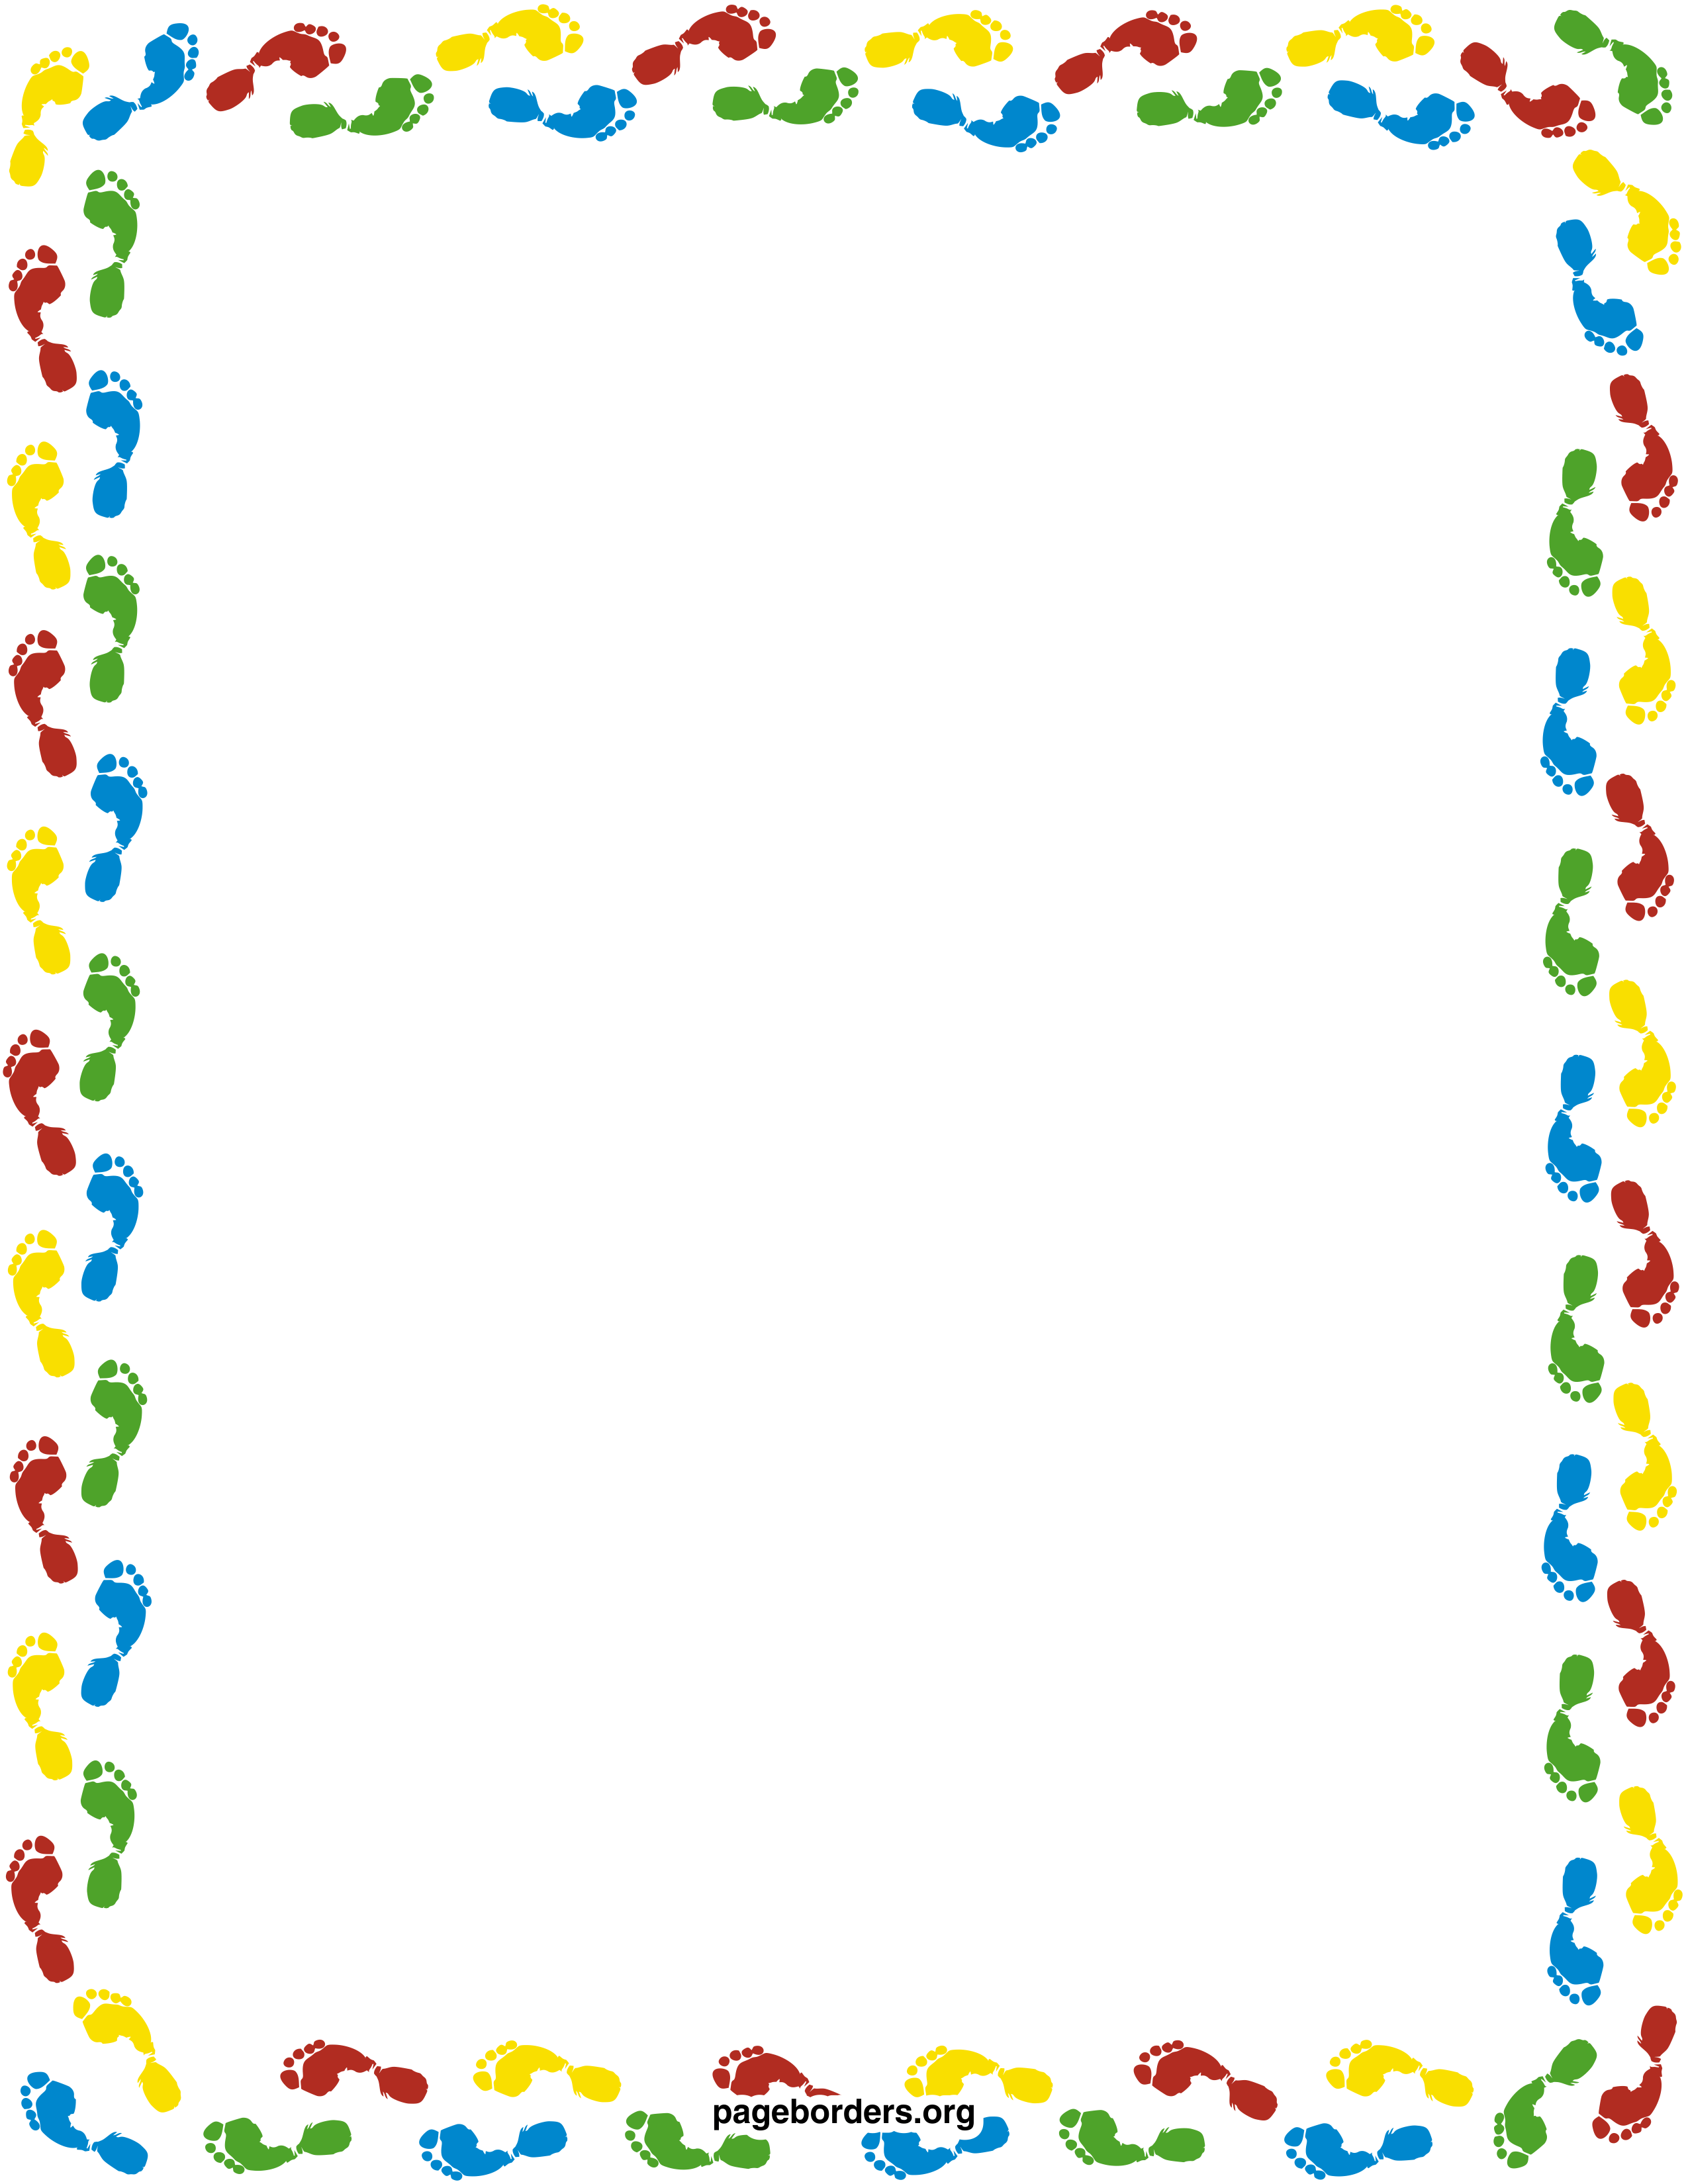 Kids page borders clipart 